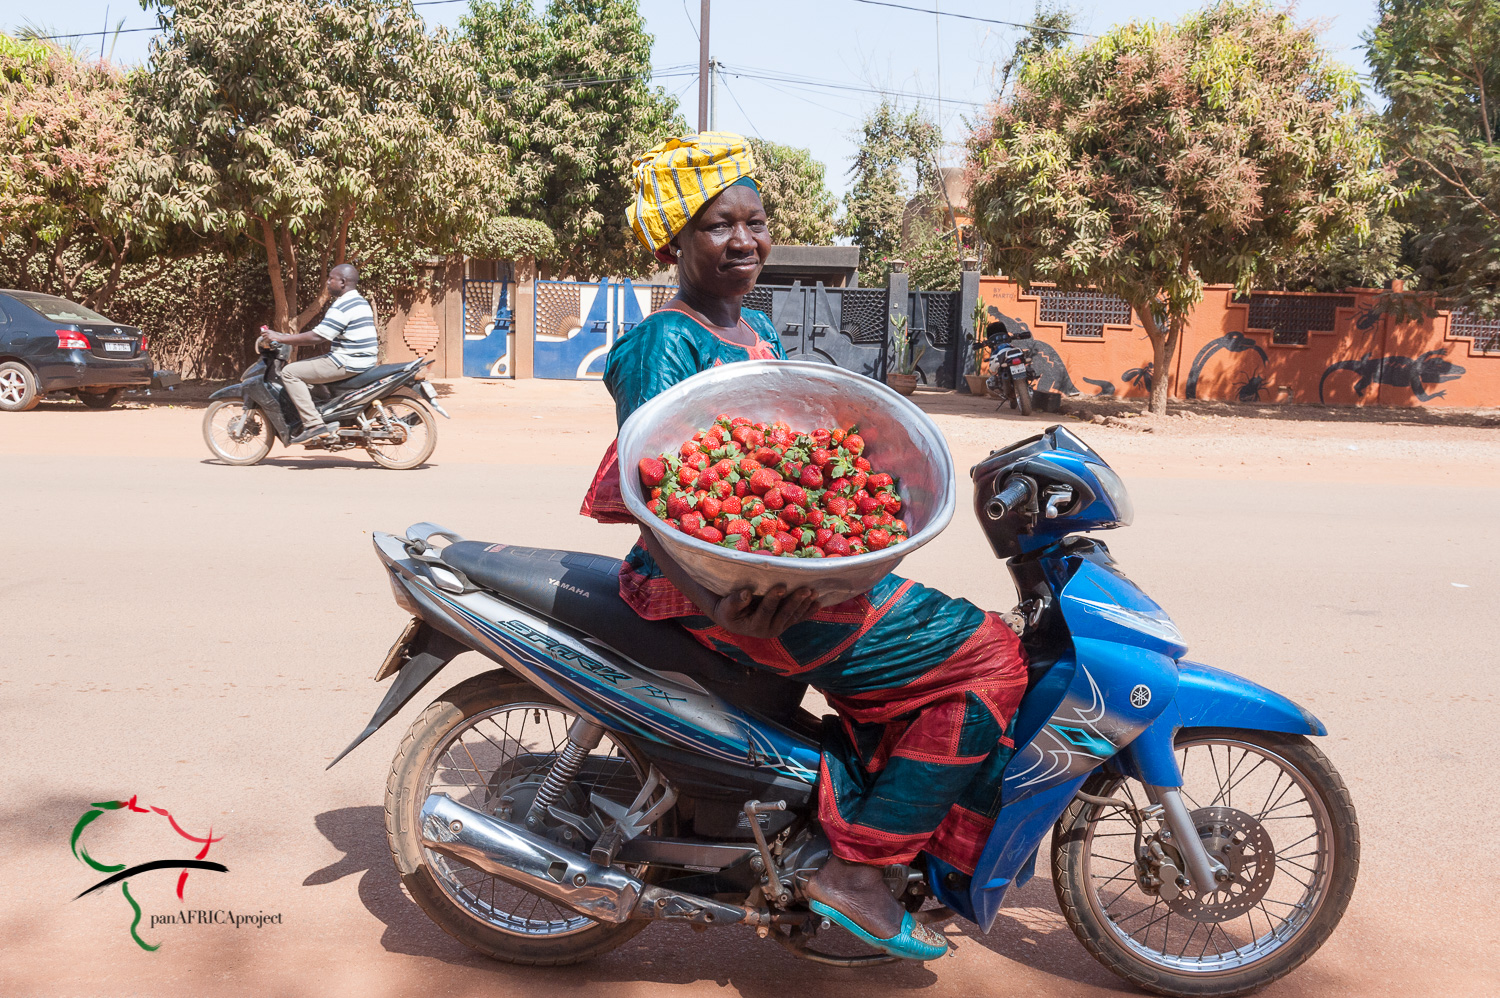 A woman selling strawberries on a motorcycle